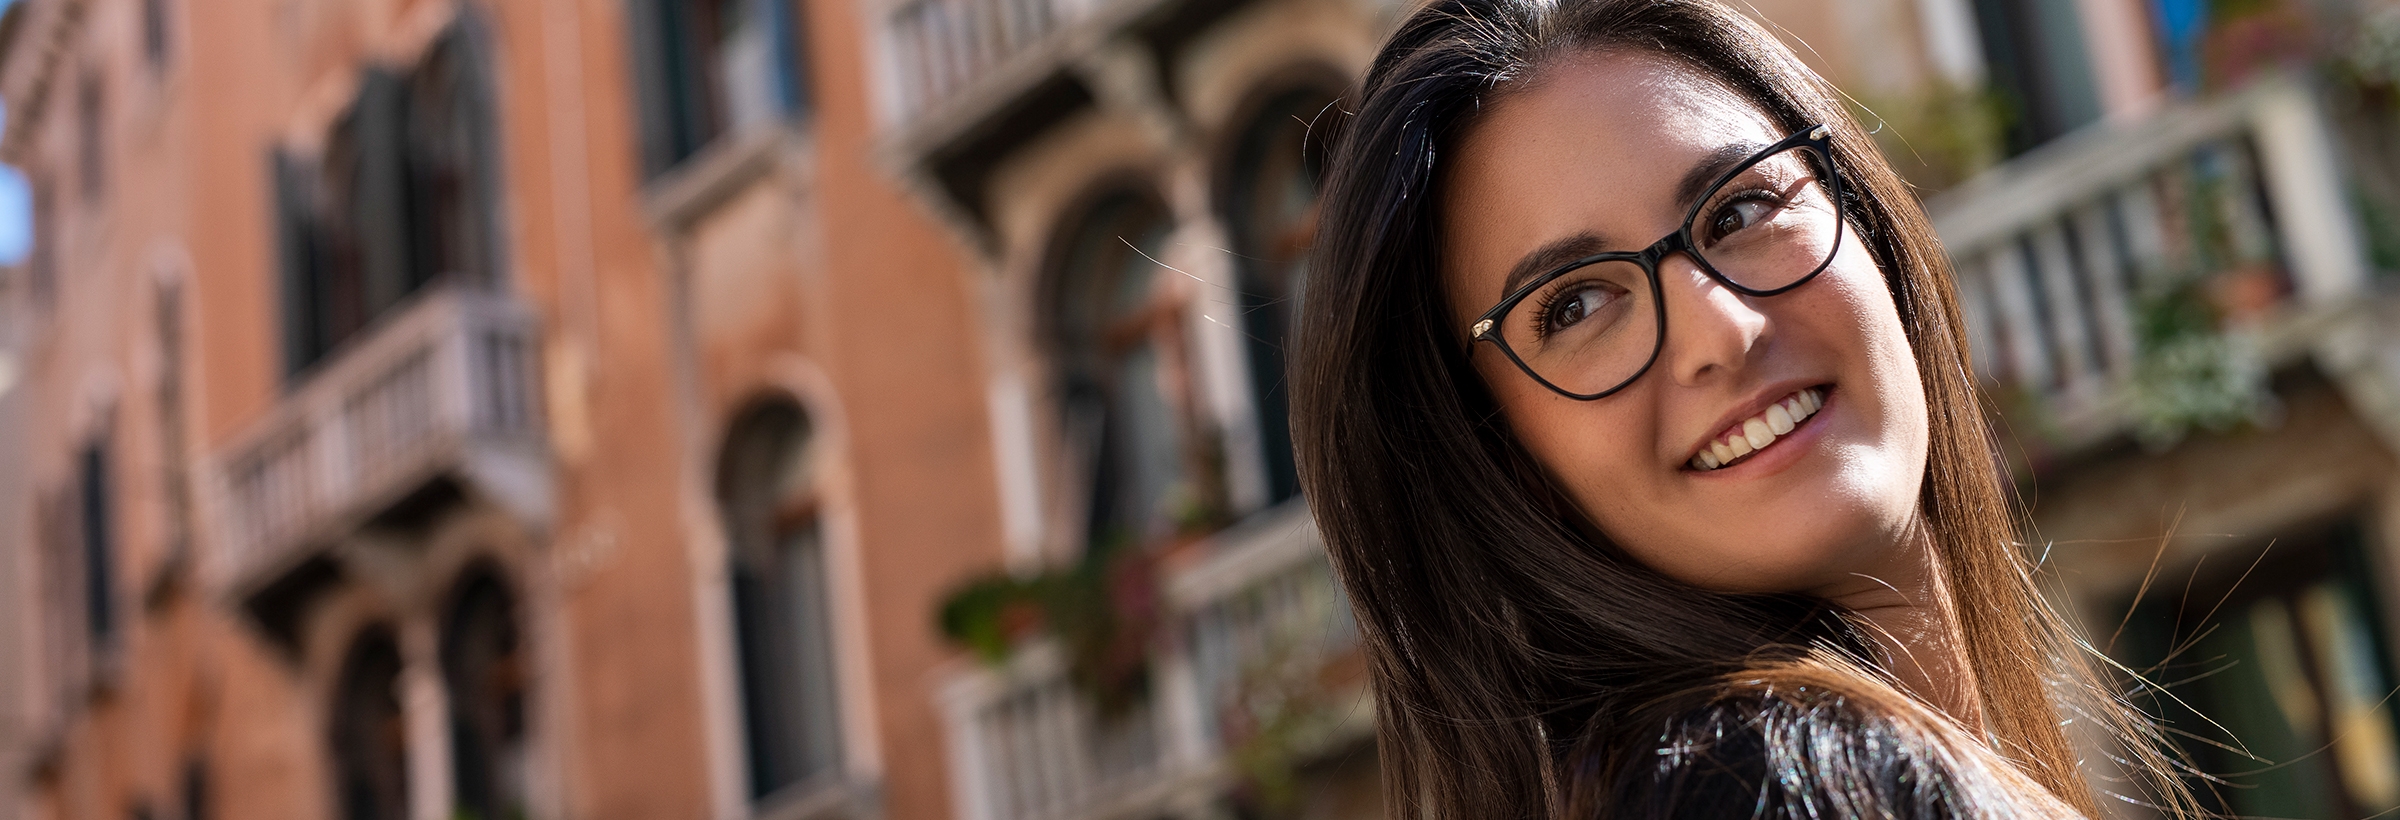 A smiling woman strolling around an Italian town wearing Arlecchino glasses